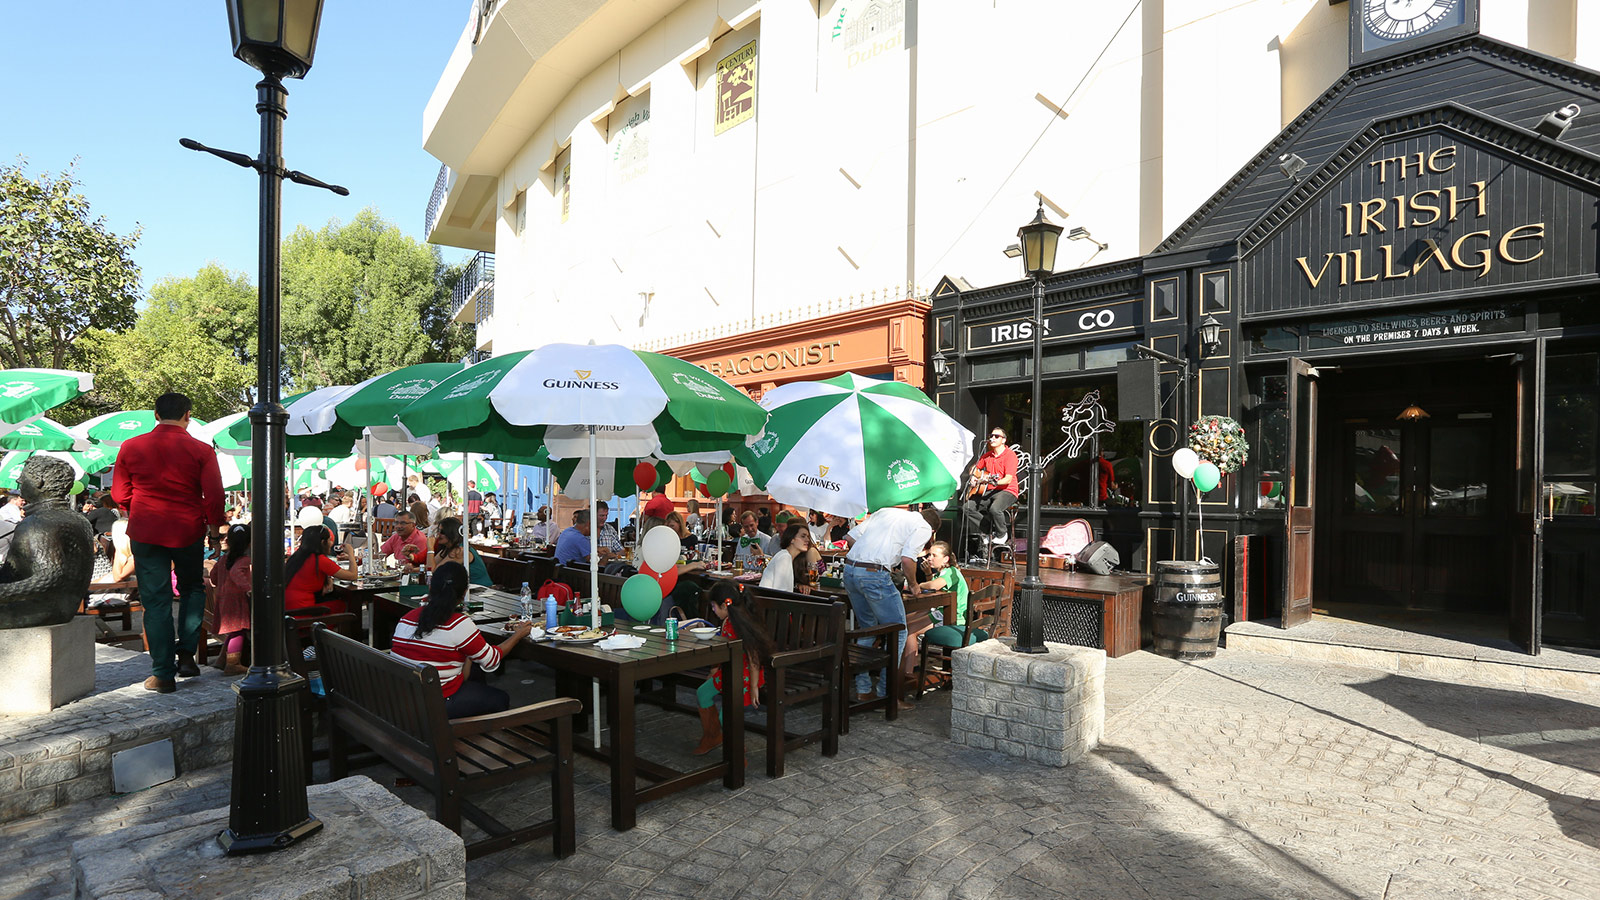 Irish Village Pub in Dubai Extends Outdoor Terrace with Meyer Sound 48 V Loudspeakers